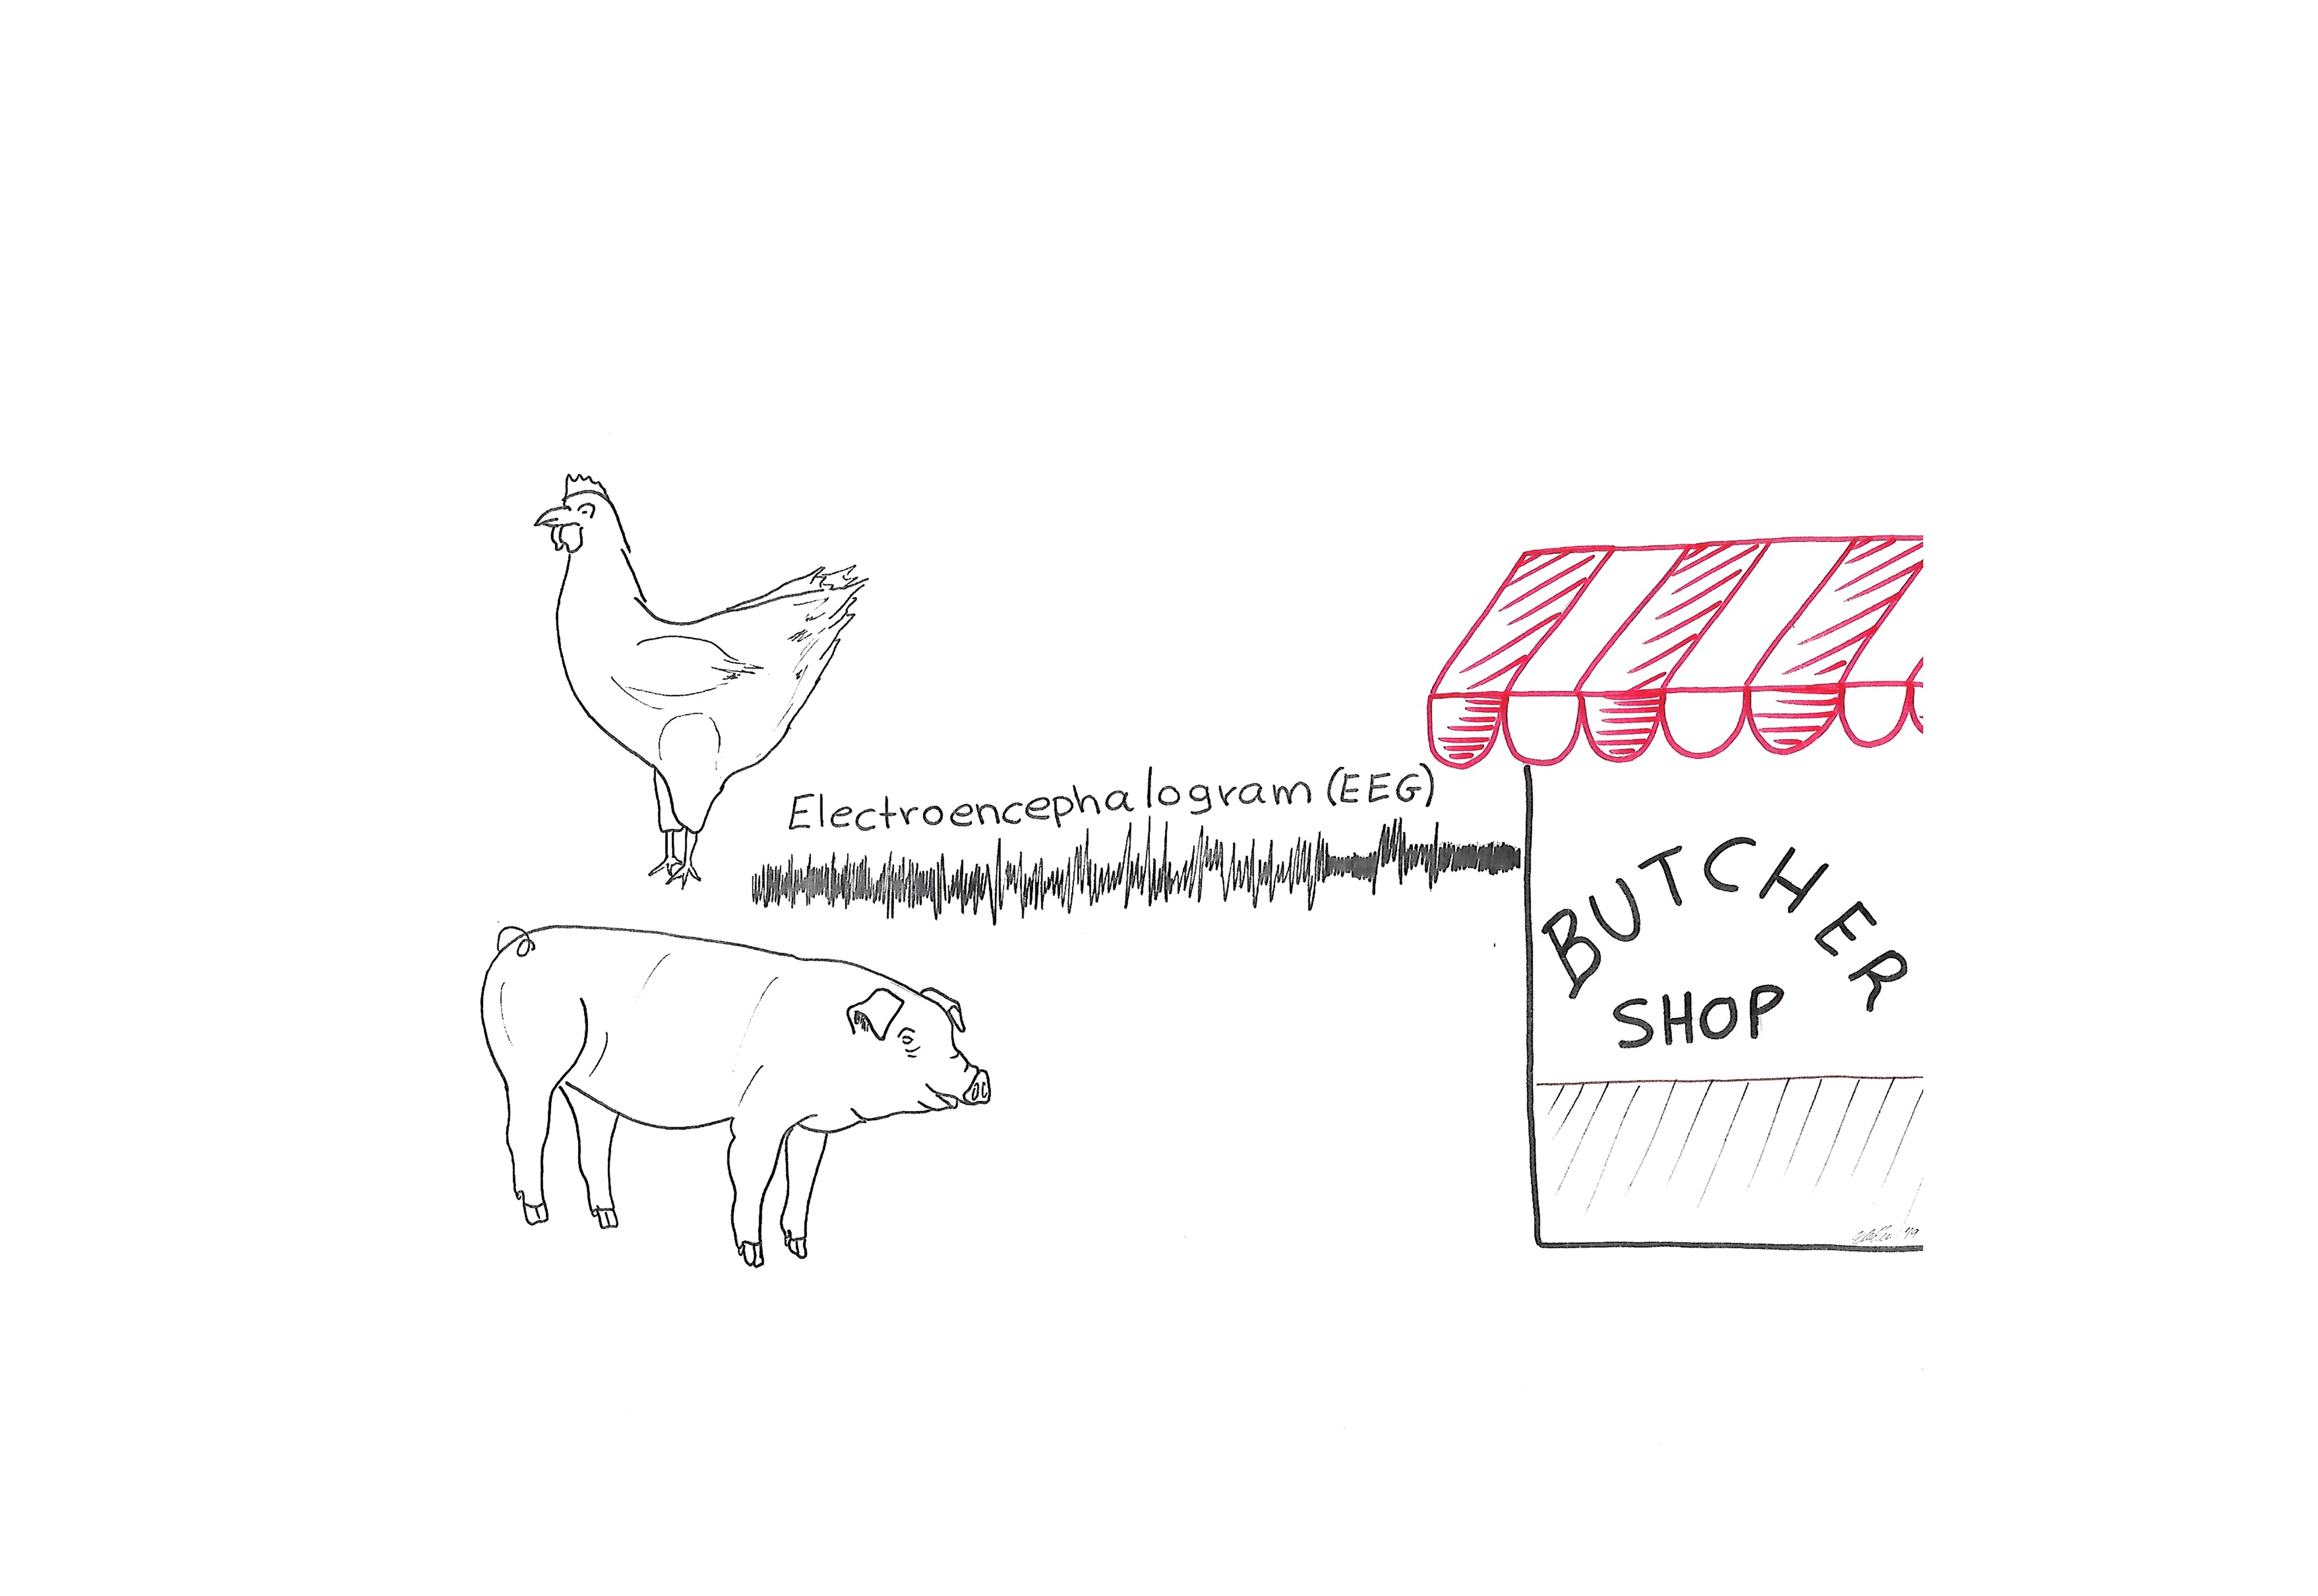 a drawing of a chicken, pig and a building with Butcher Shop written on it